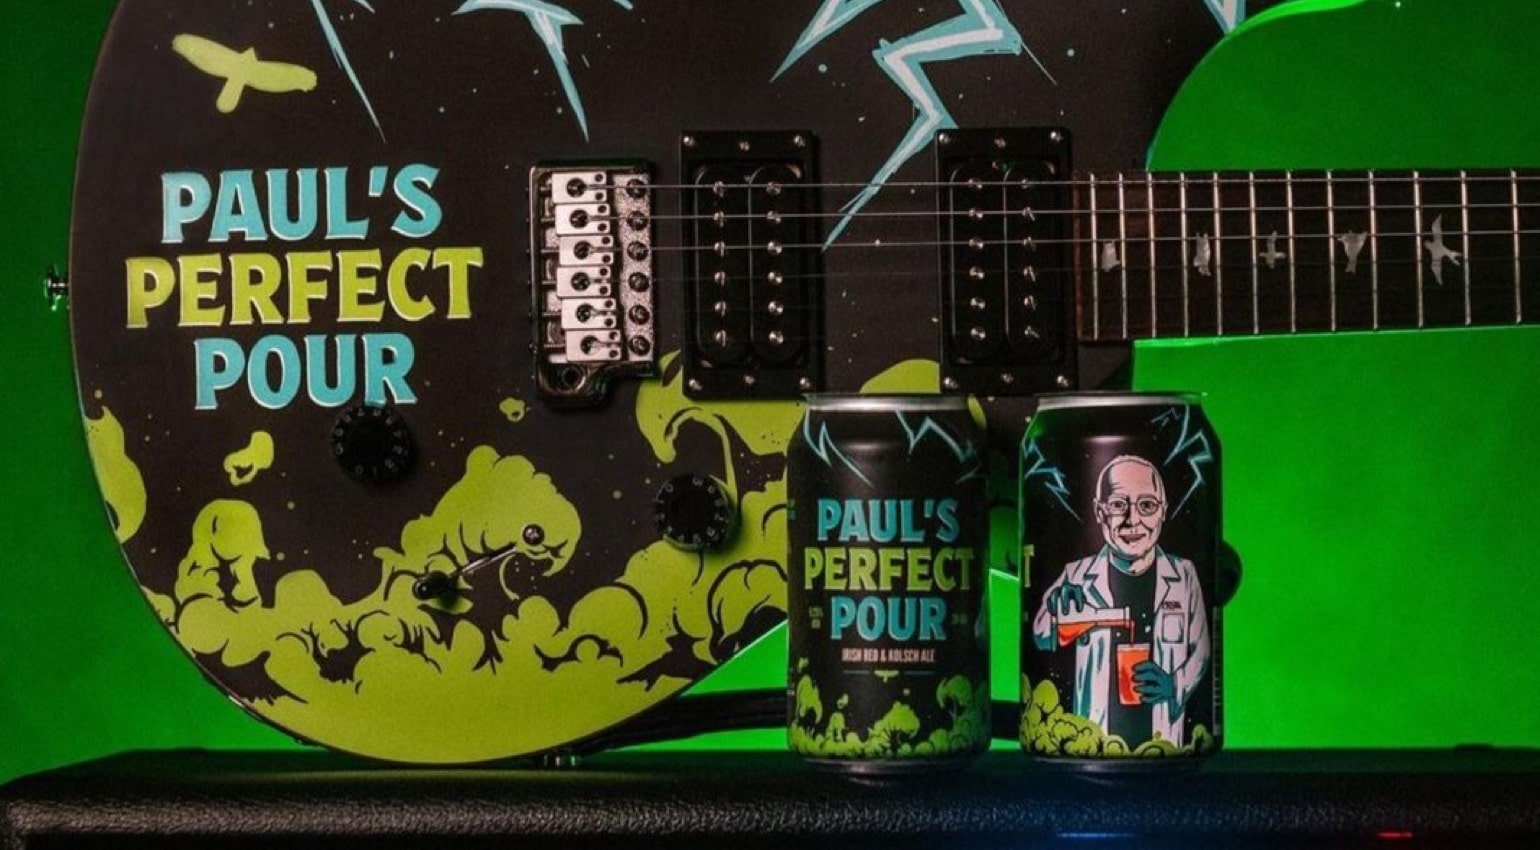 Guitar Maker Paul Reed Smith Debuts "Paul's Perfect Pour" Craft Beer 